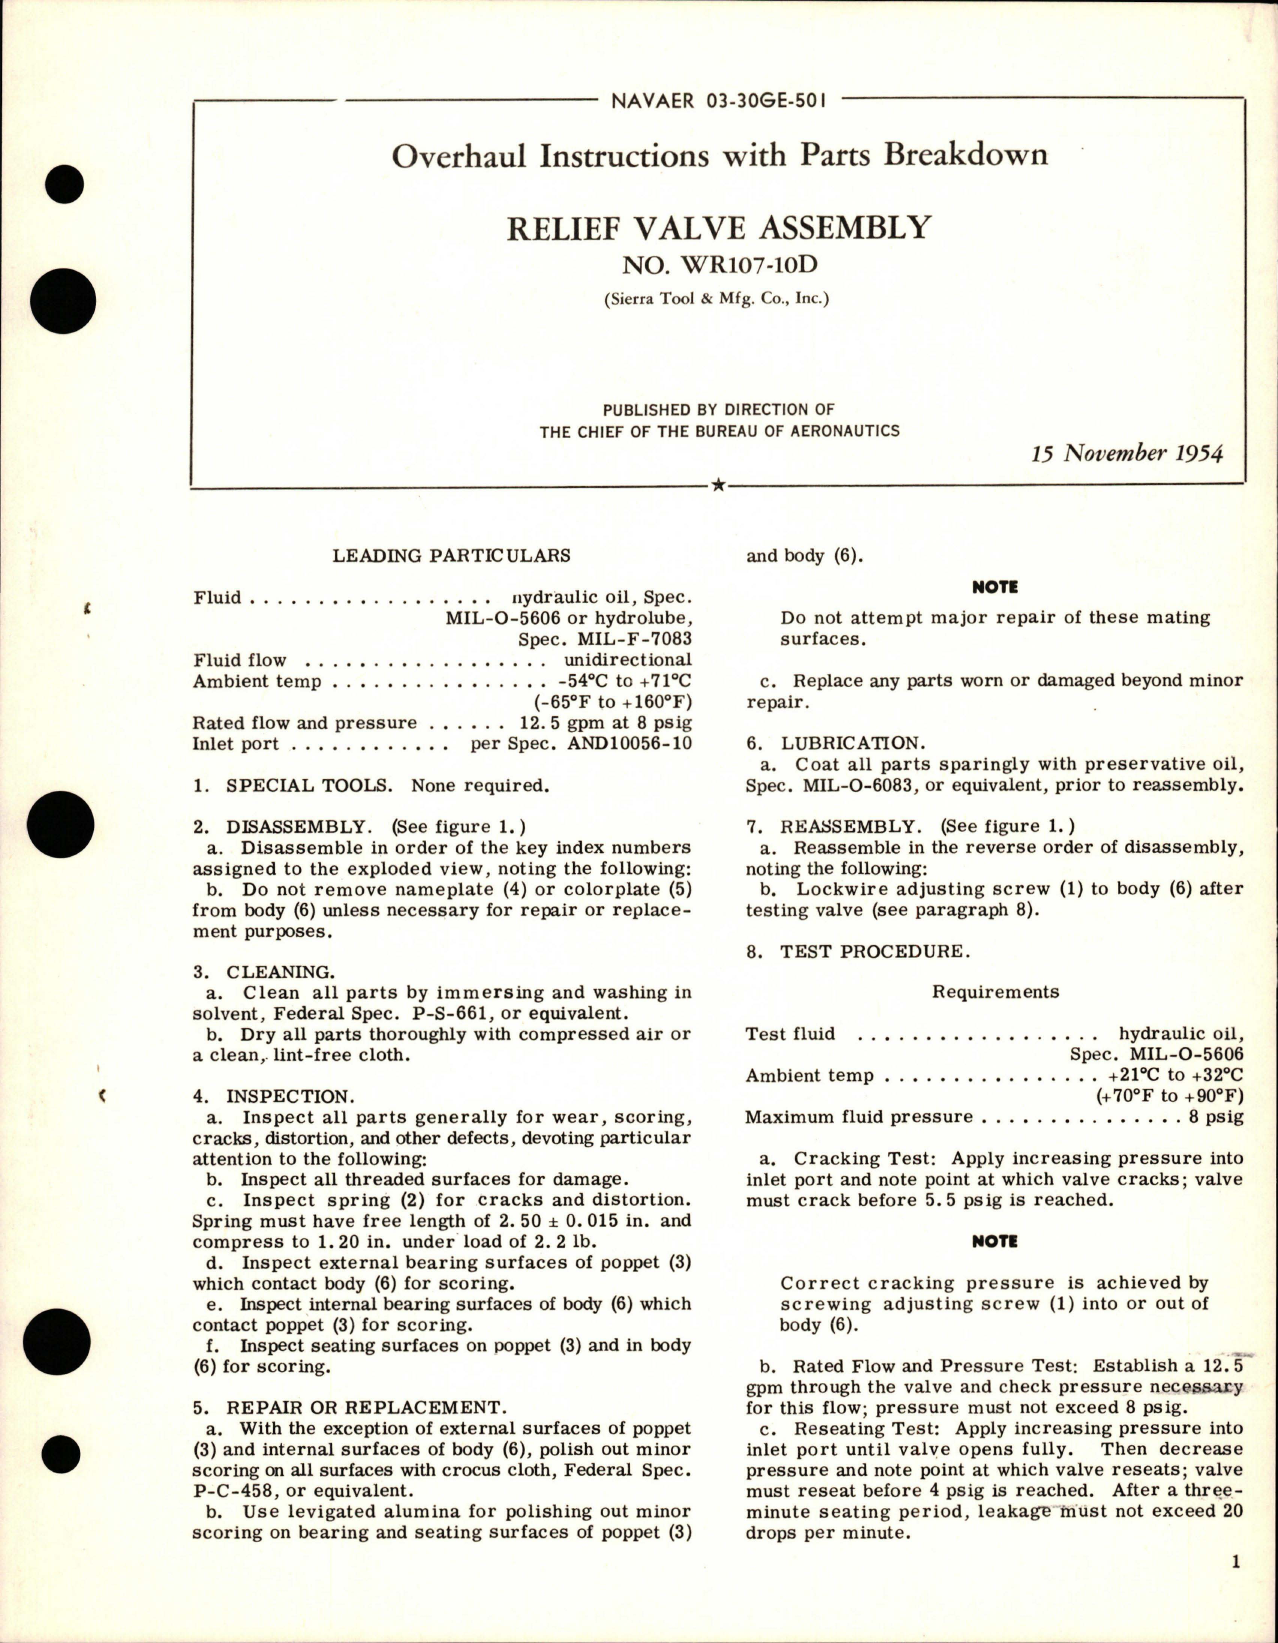 Sample page 1 from AirCorps Library document: Overhaul Instructions with Parts Breakdown for Relief Valve Assembly - WR107-10D